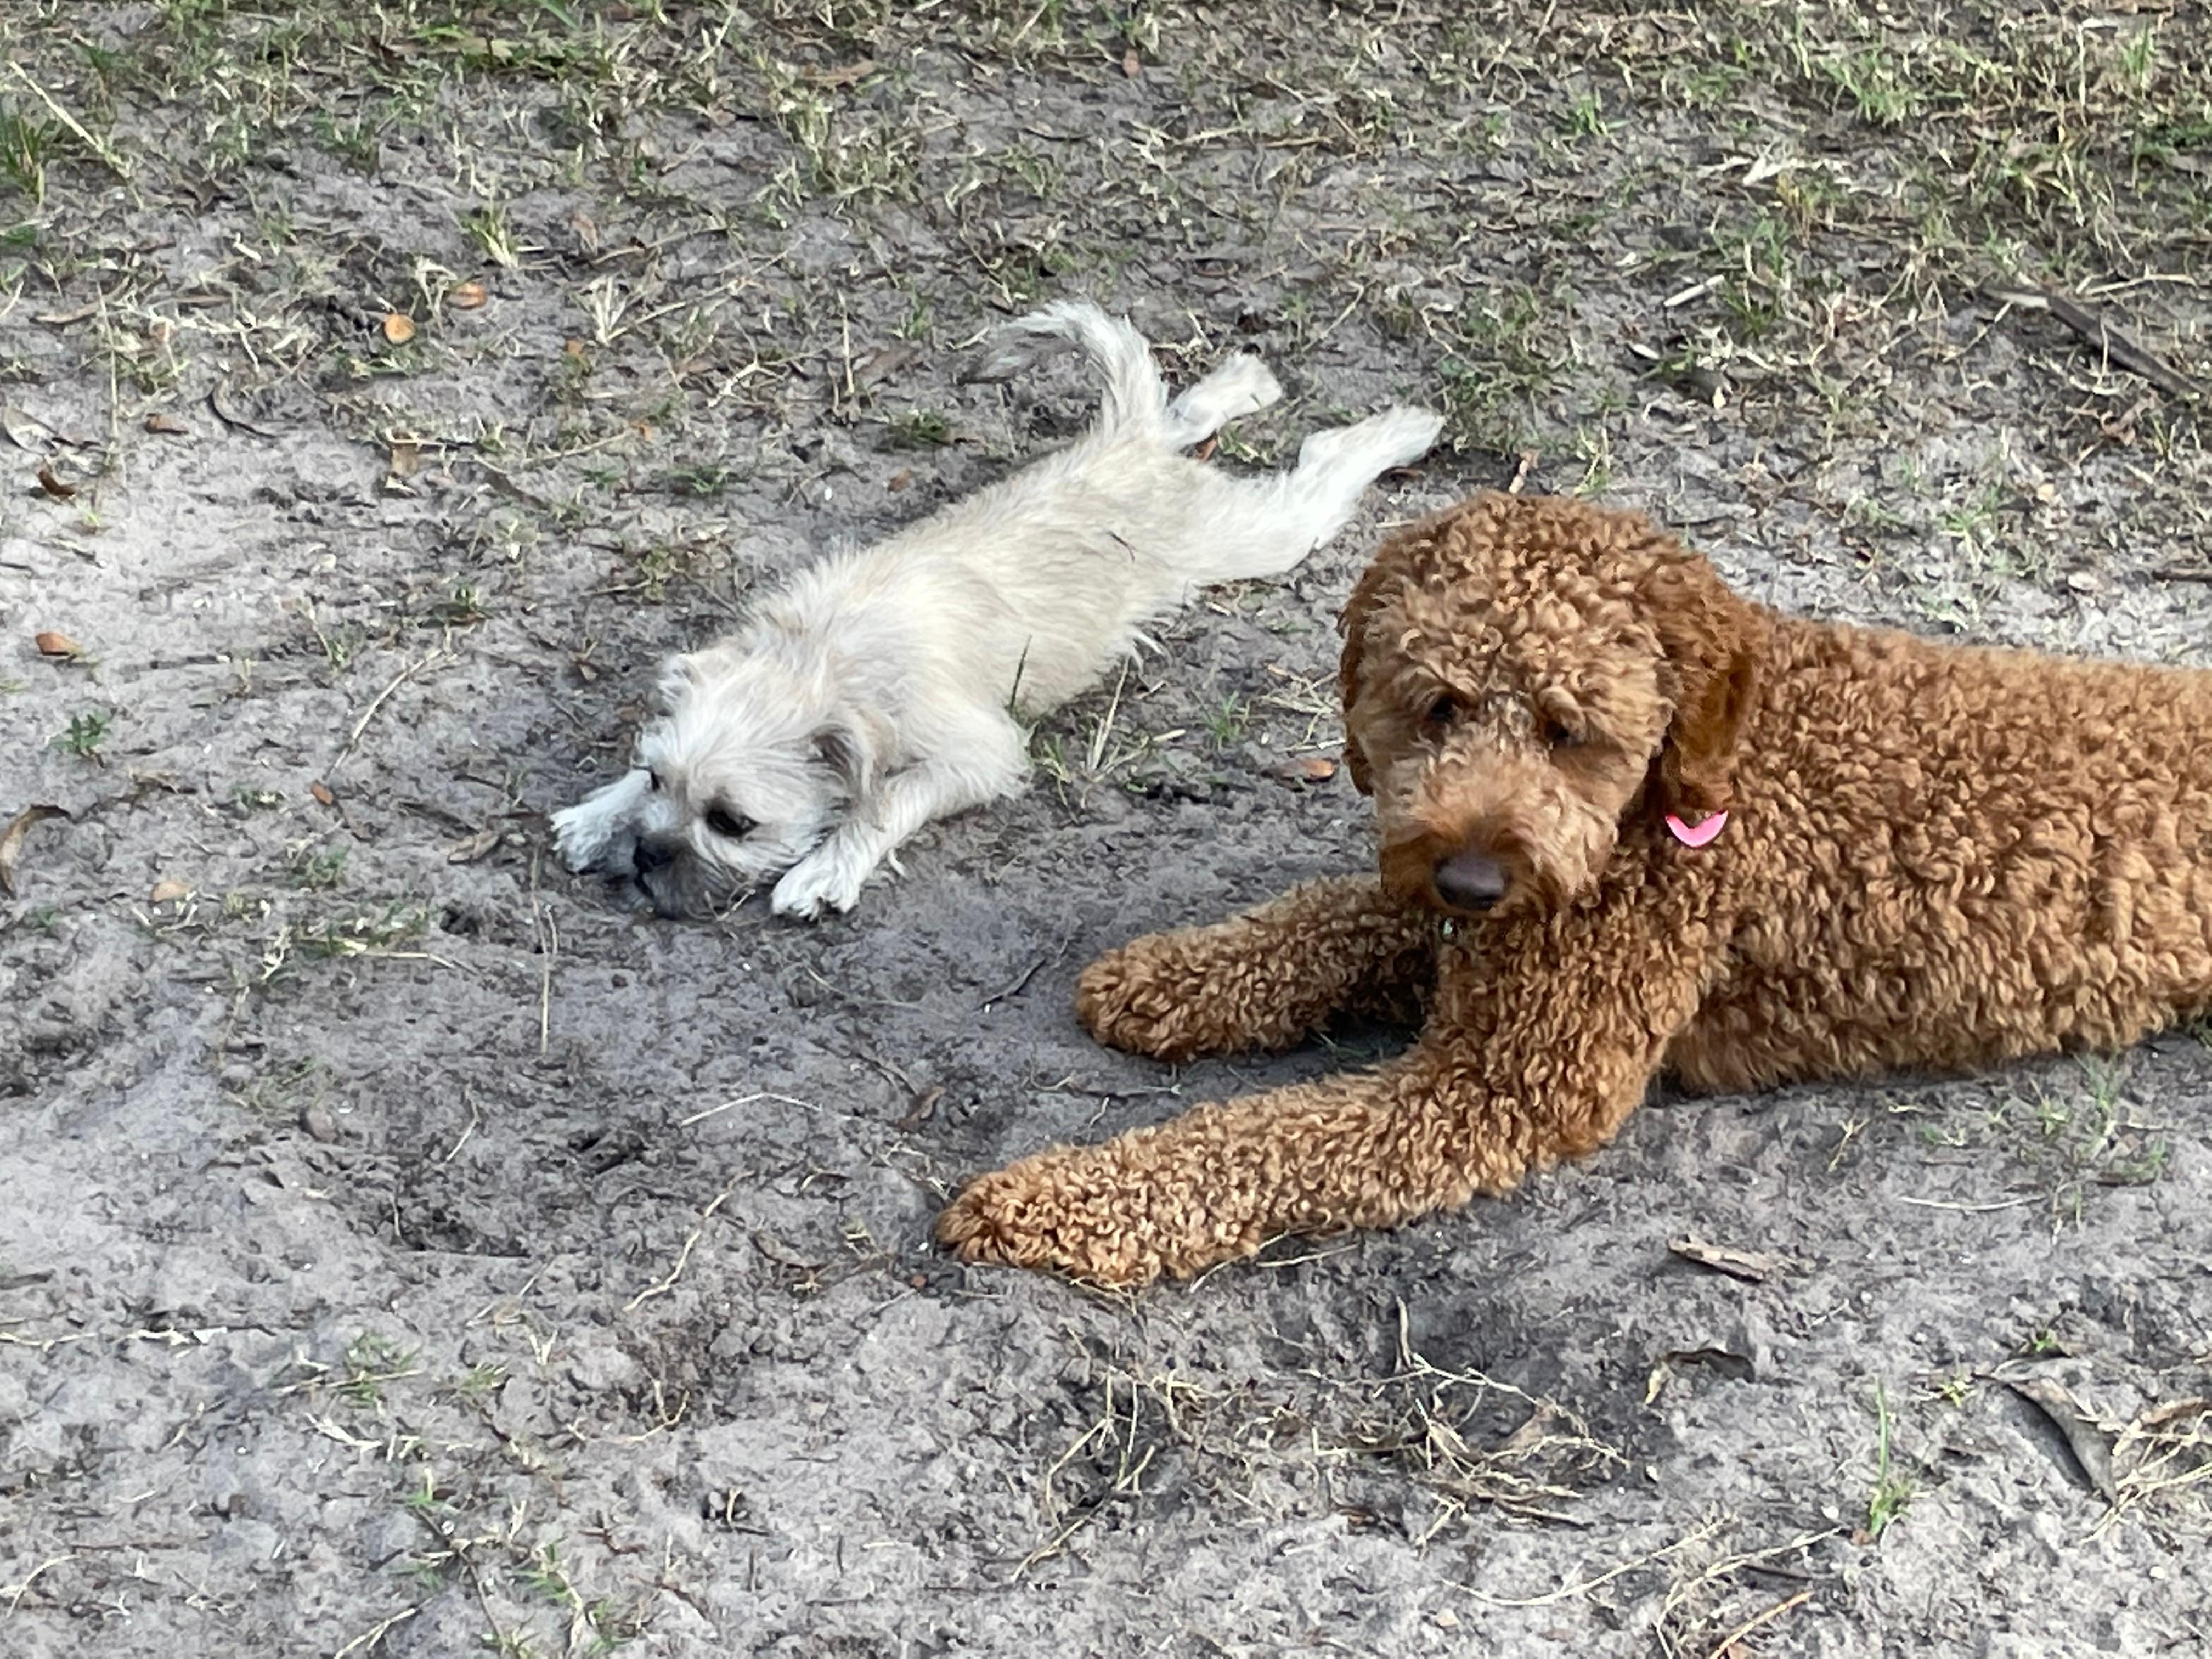 Teddy and Timmy are just hanging out at a local dog park in Palm Valley, FL.